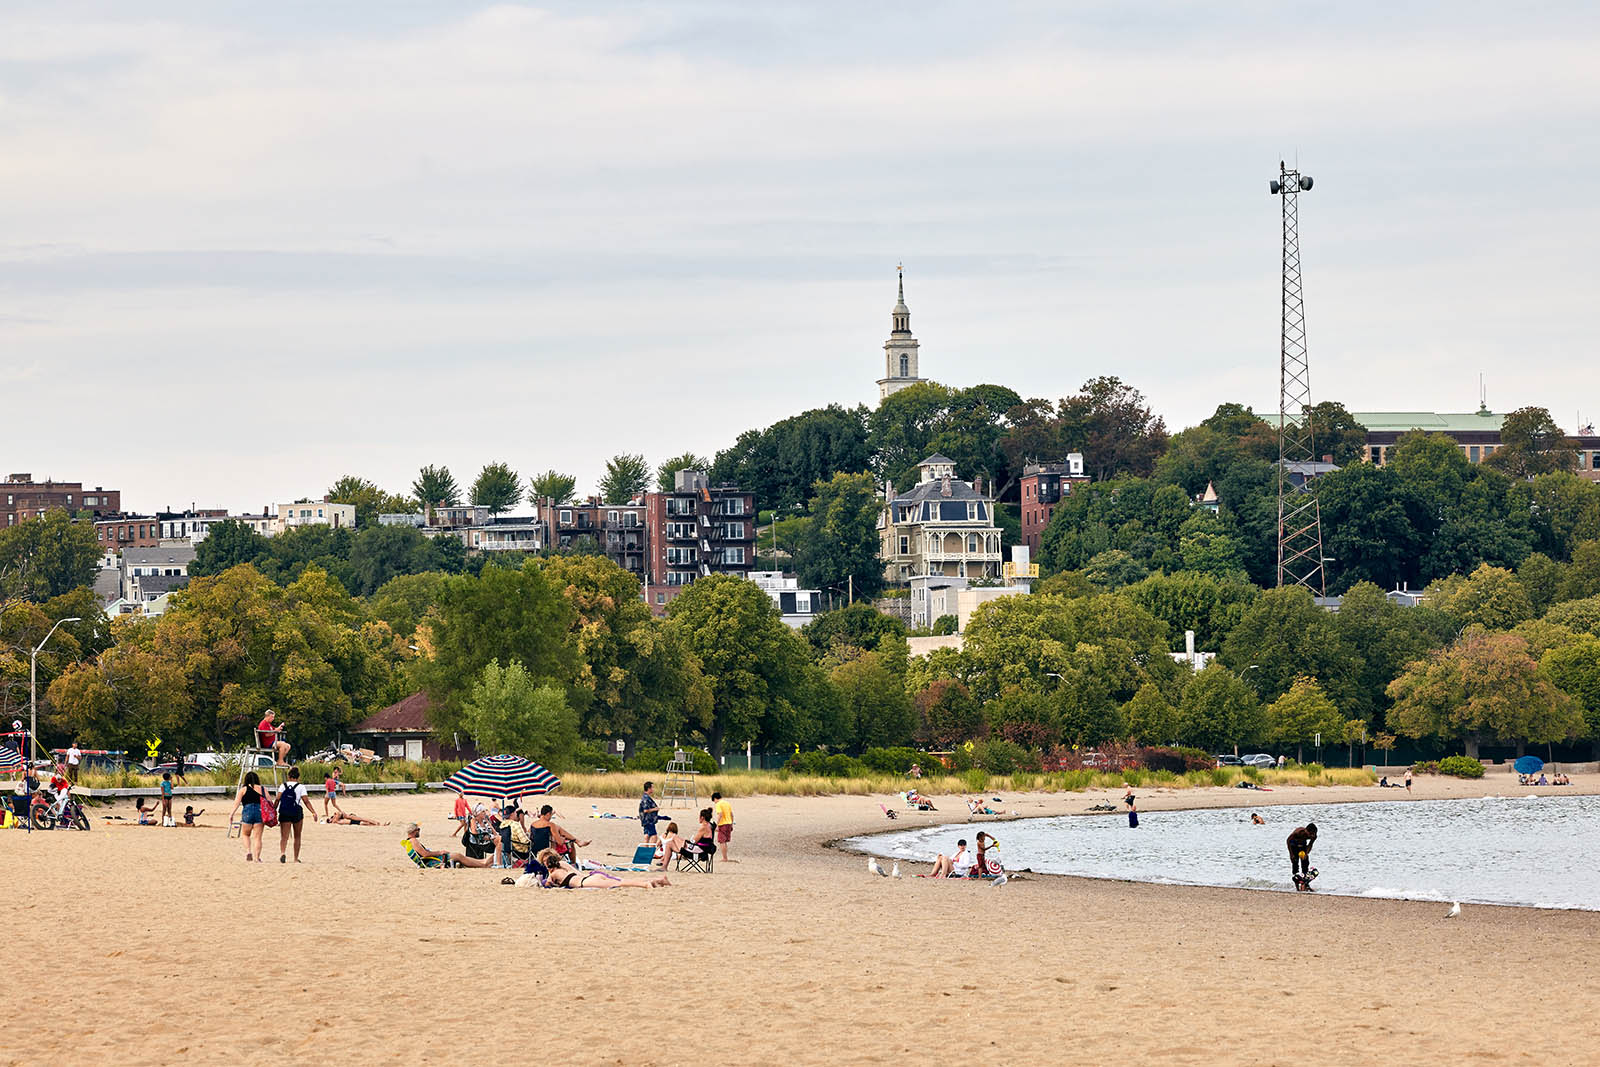 Photo of people on a beach with houses in a background